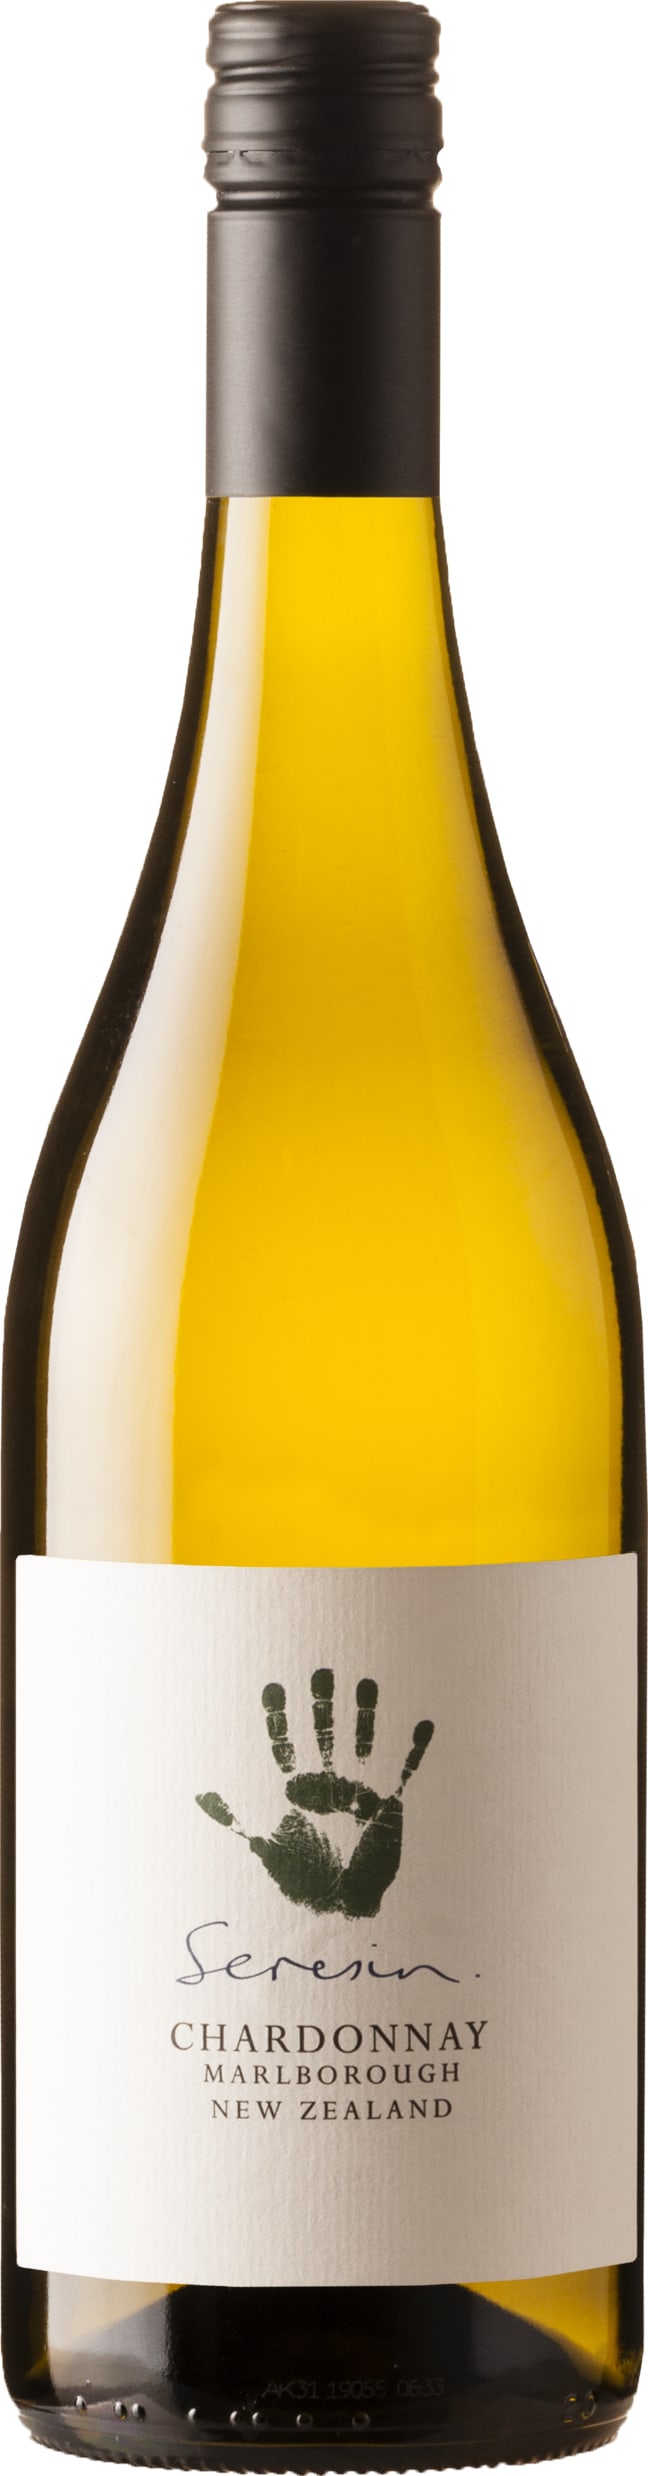 Seresin Estate Organic Chardonnay 2019 75cl - Buy Seresin Estate Wines from GREAT WINES DIRECT wine shop